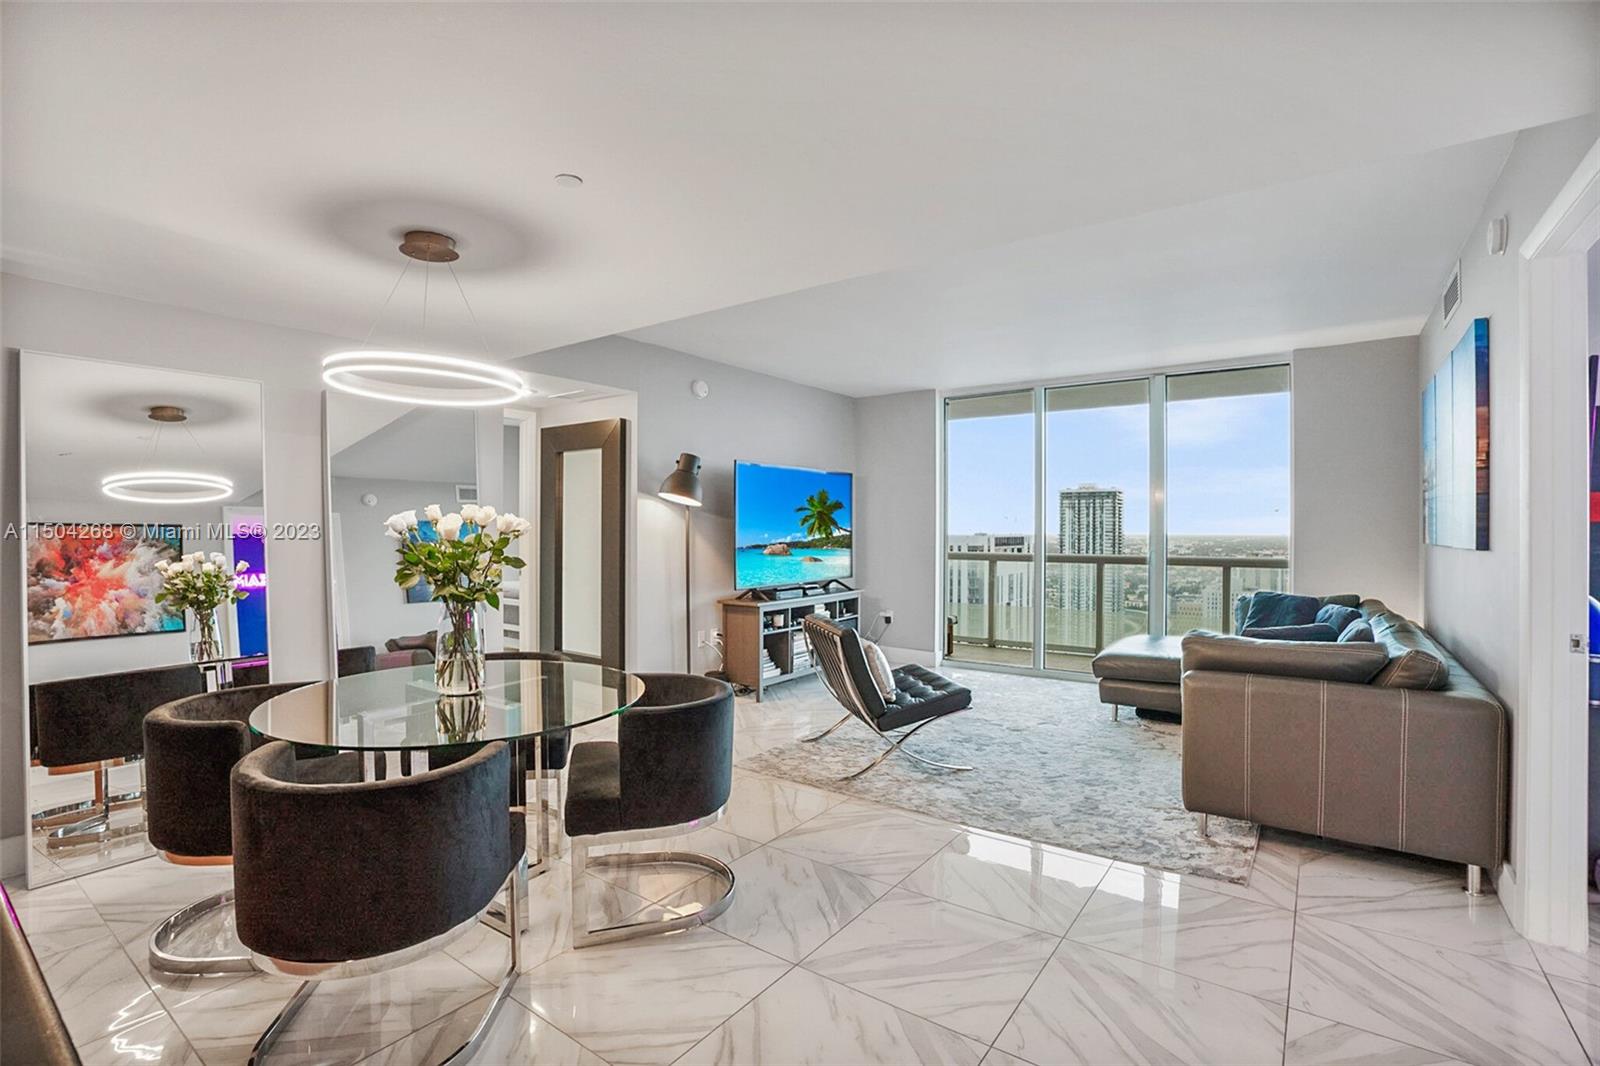 This 46th FL corner unit at 50 Biscayne features 2 Beds, 2 Baths w/ a large wraparound balcony facing South & West. Enjoy the sunset year-round with sweeping unobstructed views of the city on one side & partial bay views on the other. This split floor plan features an open kitchen/living room layout, floor-to-ceiling impact windows, HomeKit/Alexa/Google Home switches/controls, & 1 garage parking. First-class amenities include a 24-hour concierge, fitness center, sauna & spa, infinity pool & jacuzzi w/ cabanas, social room, & valet parking. Located in the heart of Downtown, with easy access to Miami Intl airport & Brightline station. 1 block from Metromover/Metrorail. Close to Arena, Perez Art Museum & Arsht Center, the finest restaurants, Whole Foods, and shops at Brickell City Center.